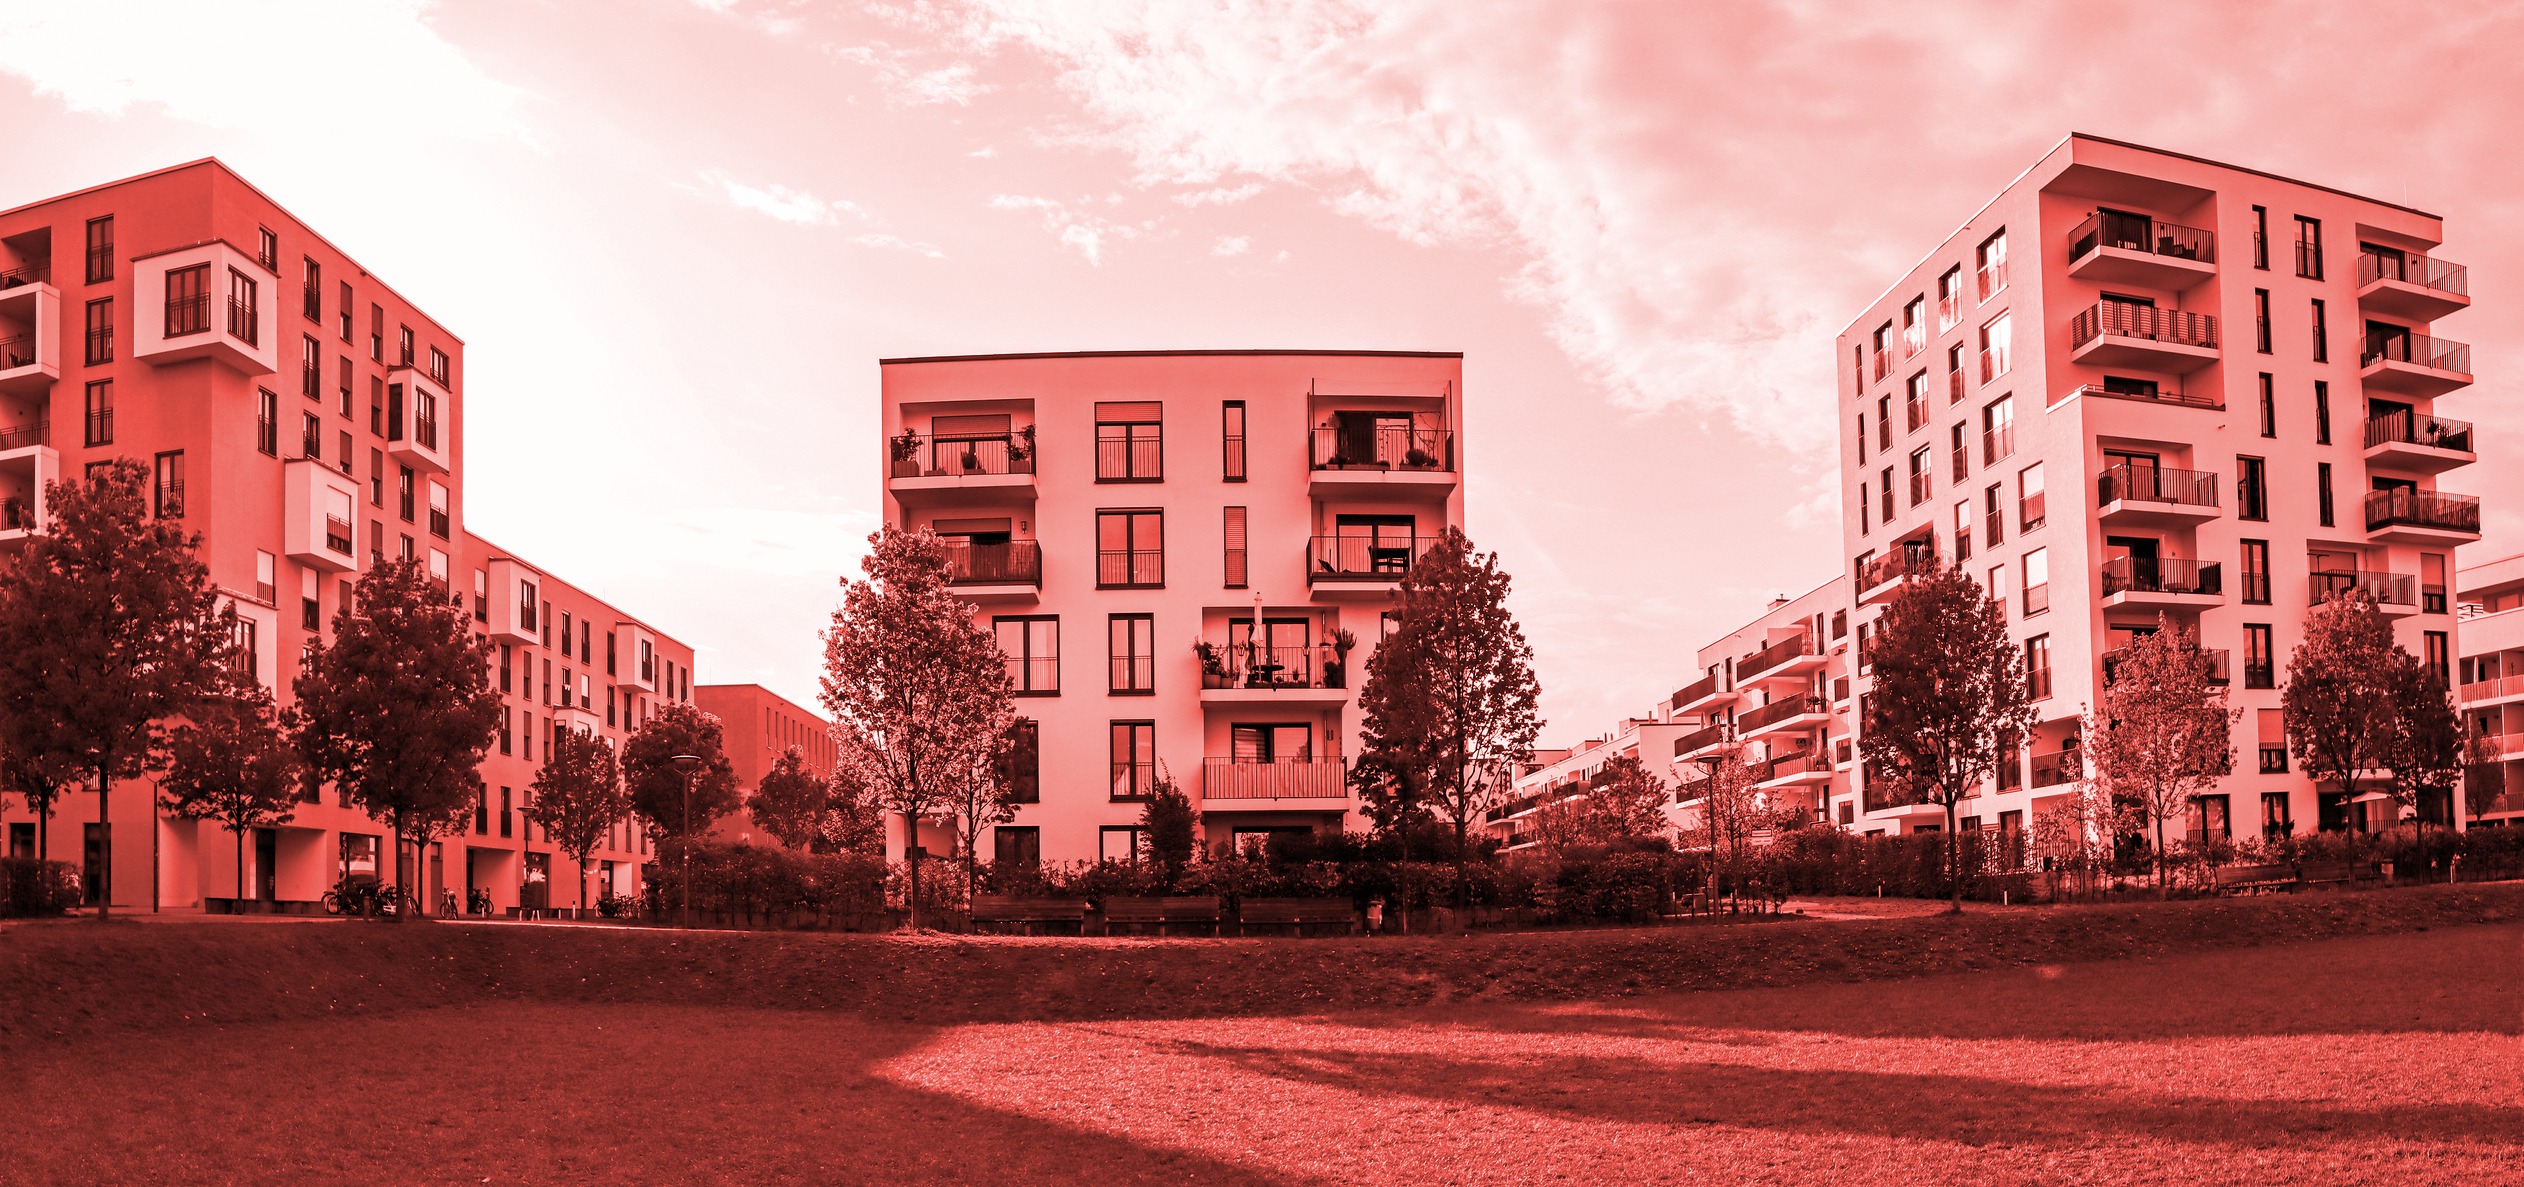 A red and white photo of a row of apartment buildings.